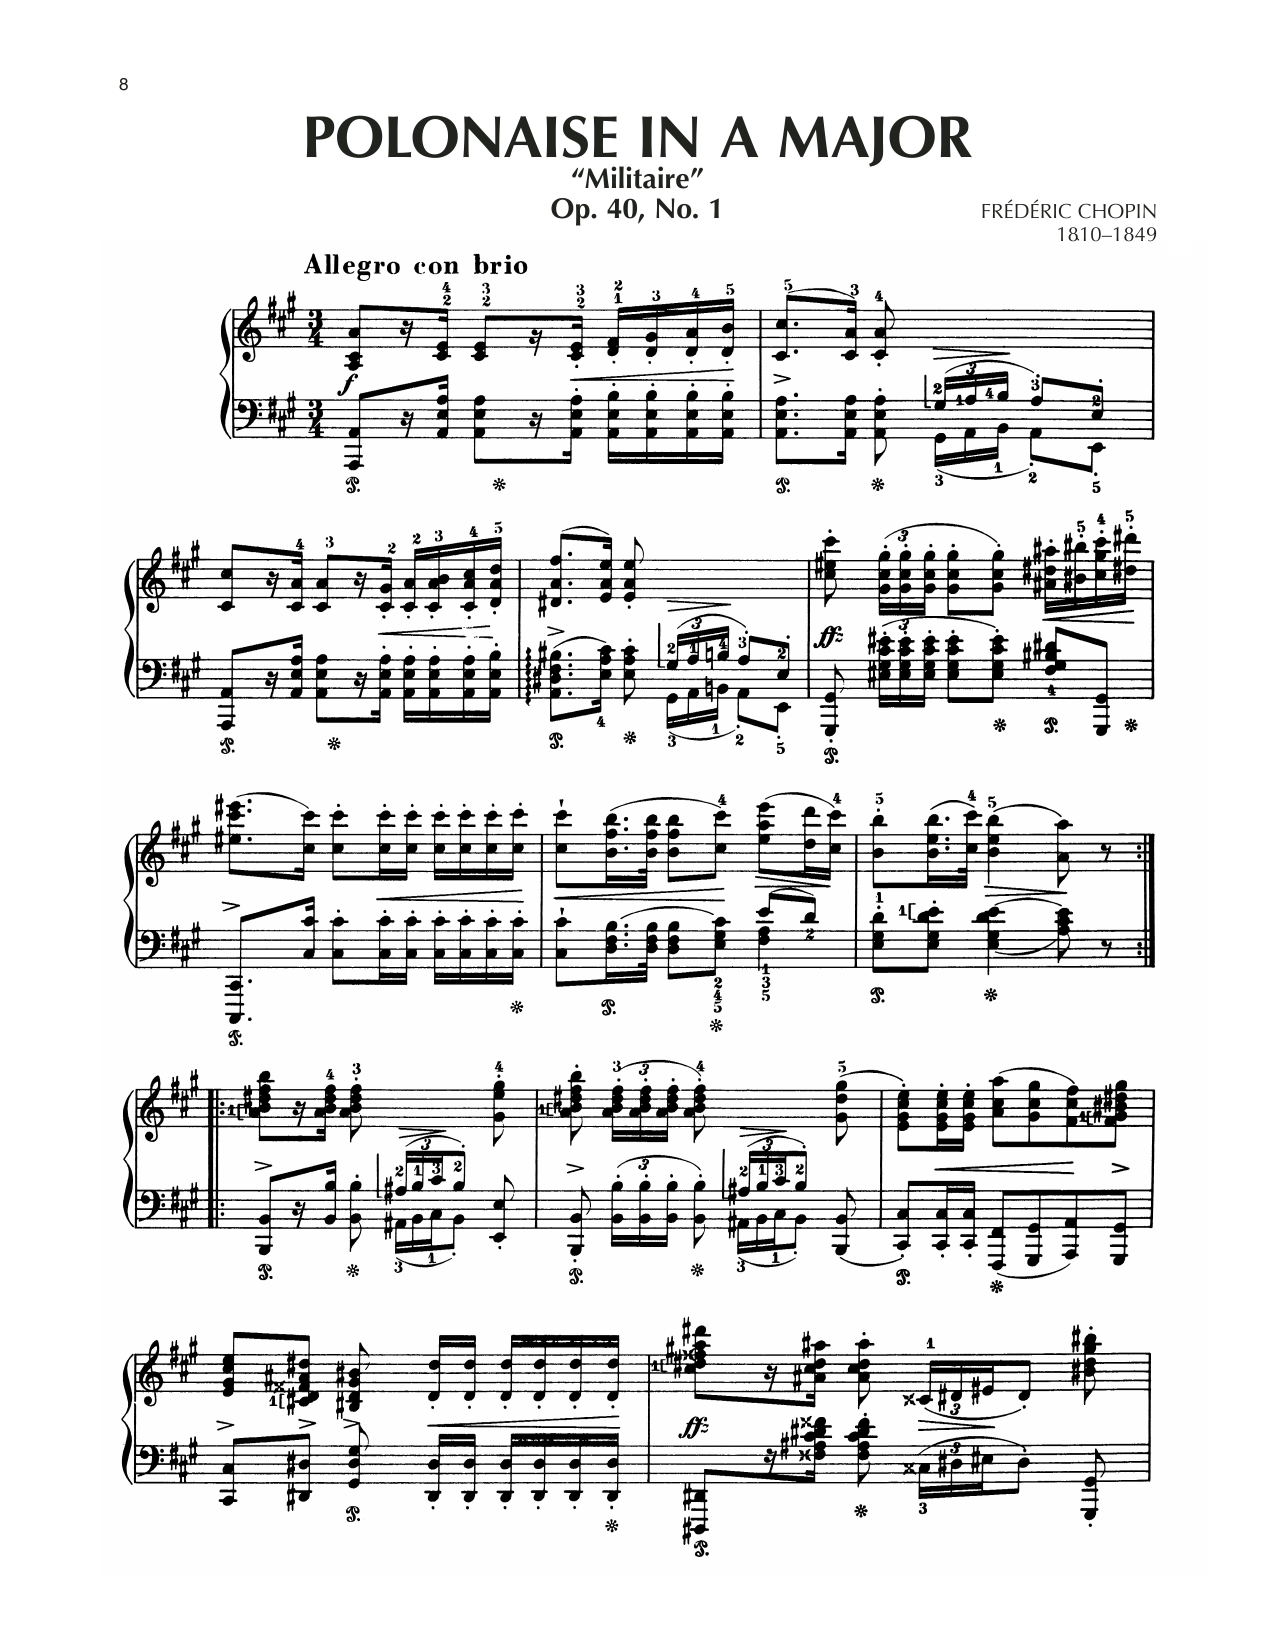 Download Frederic Chopin Polonaise In A Major, Op. 40, No. 1 Sheet Music